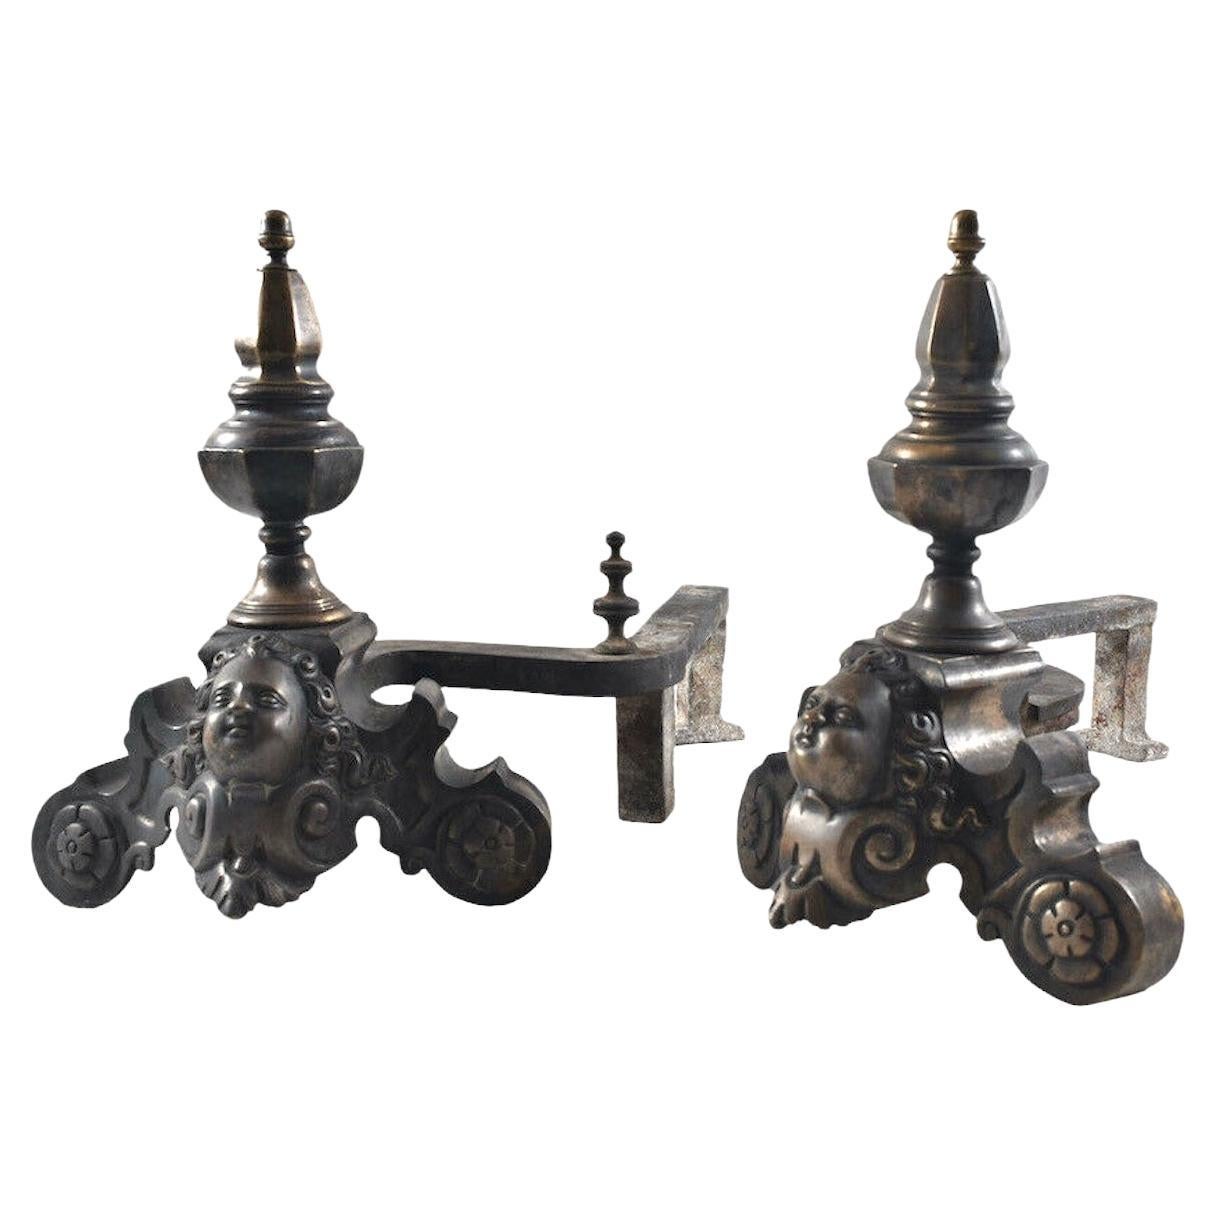 Outstanding Pair of German Historism Victorian Andirons with Angel Heads For Sale